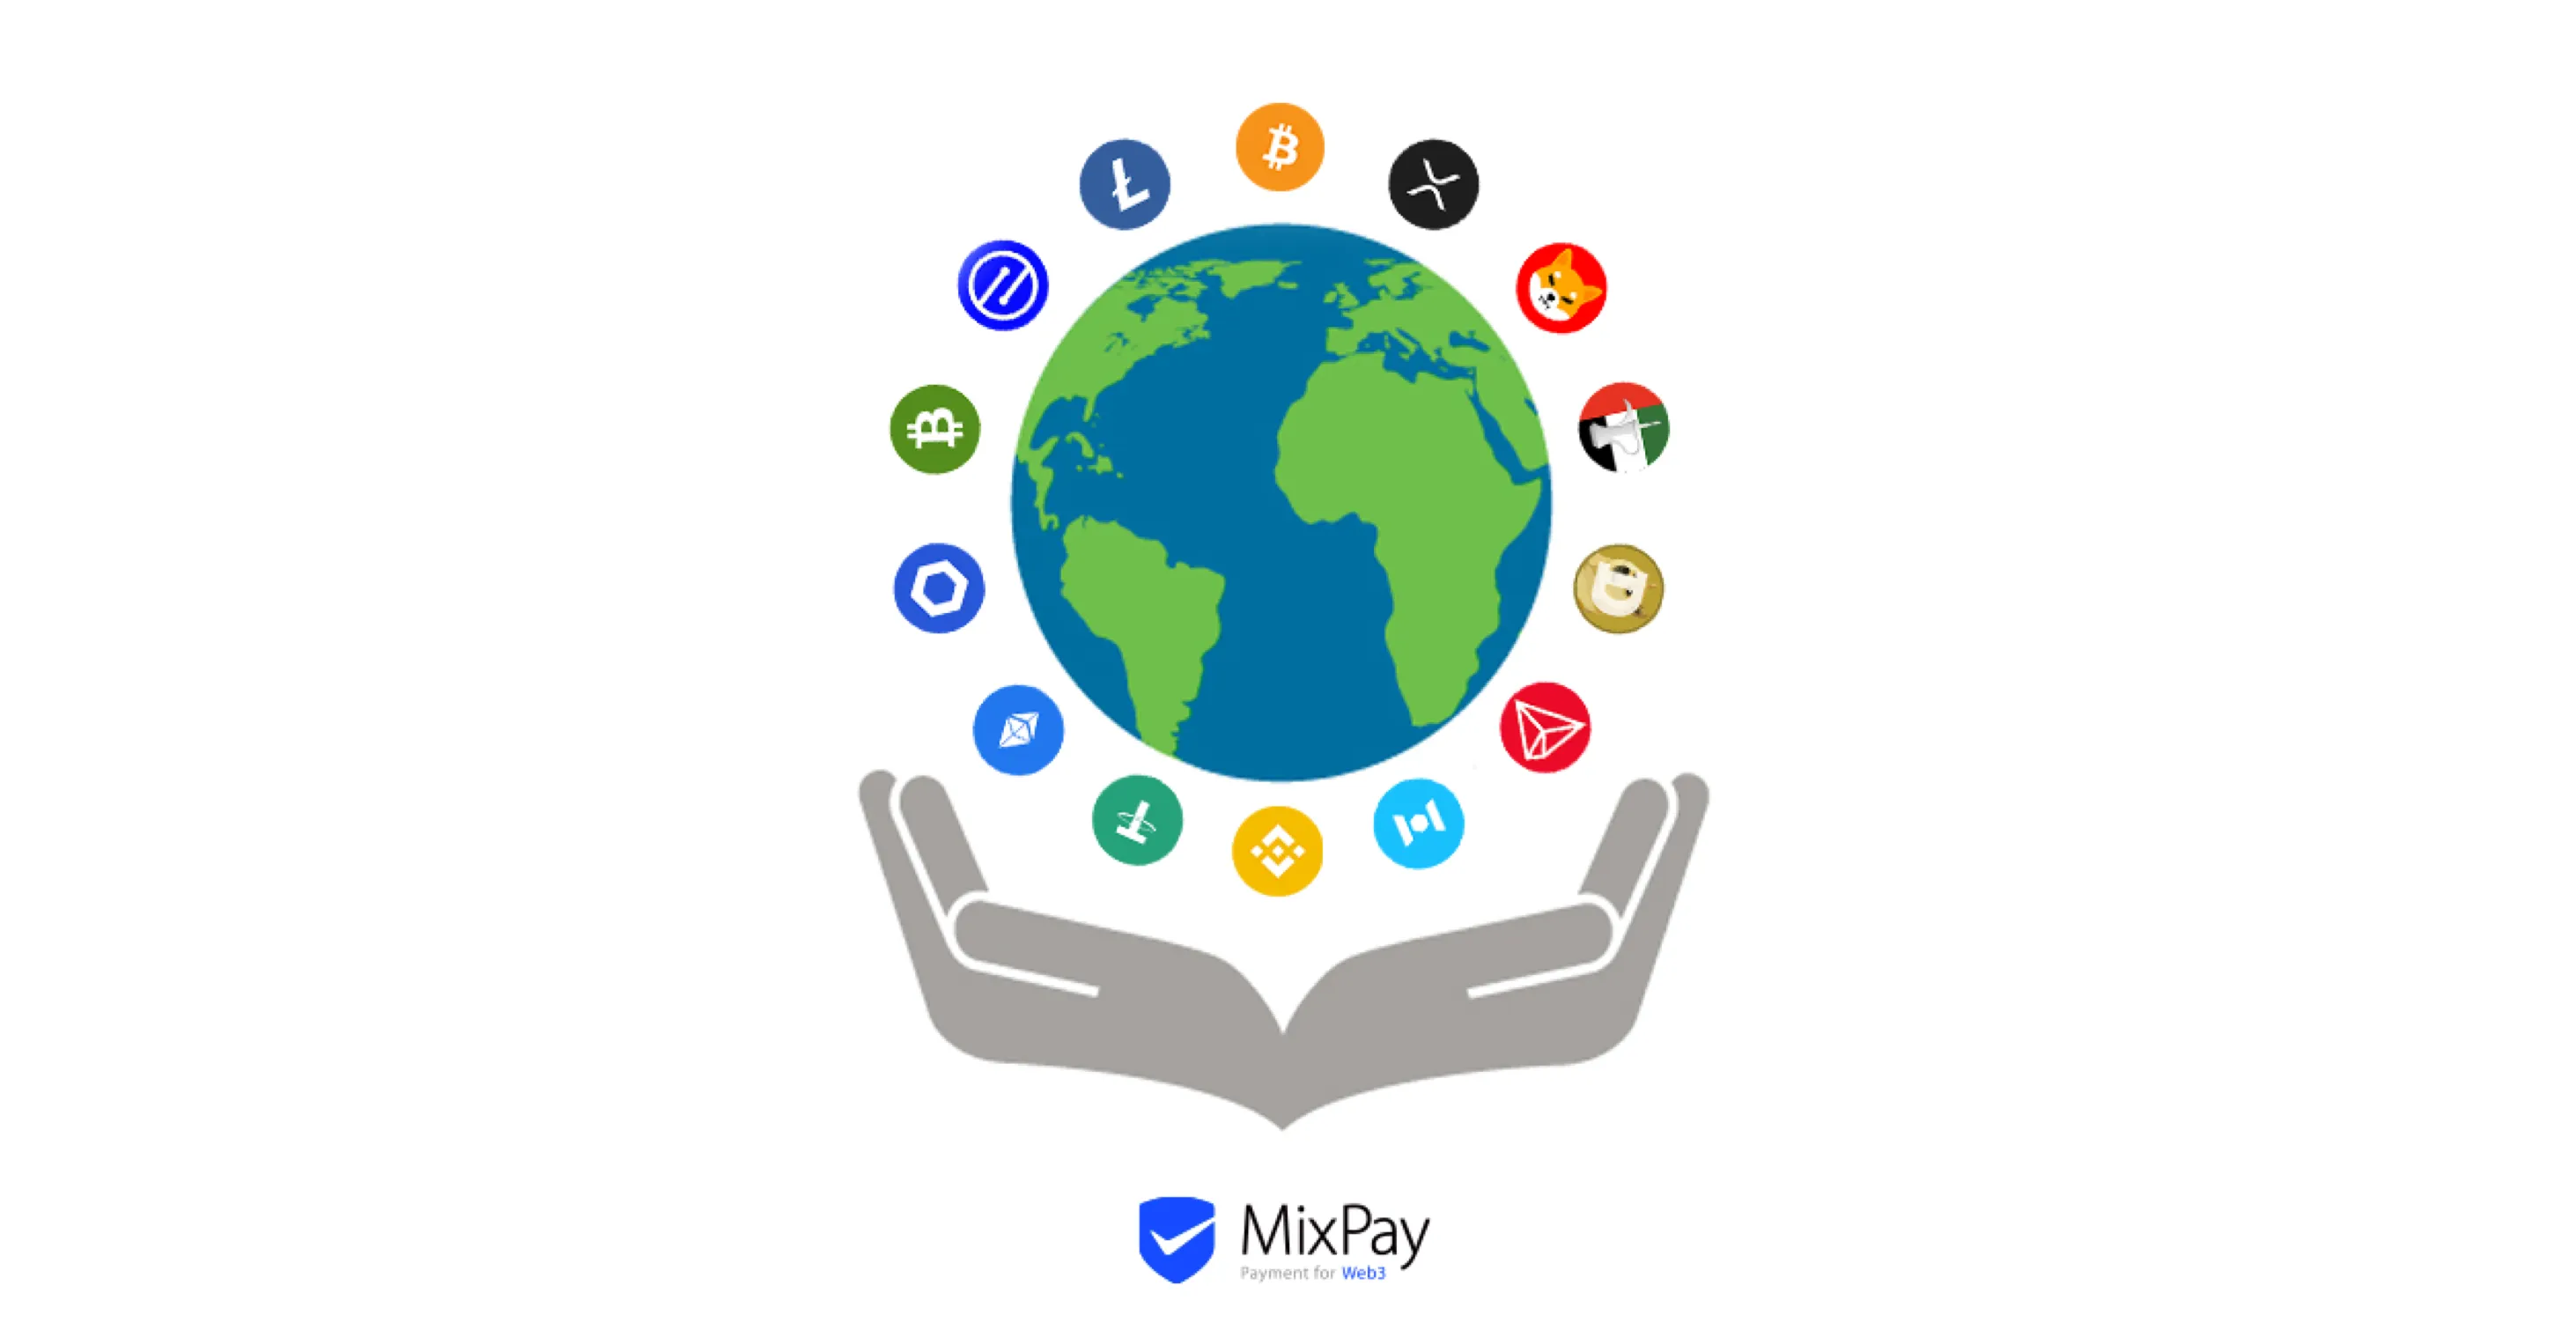 Accept cryptocurrency donations with MixPay